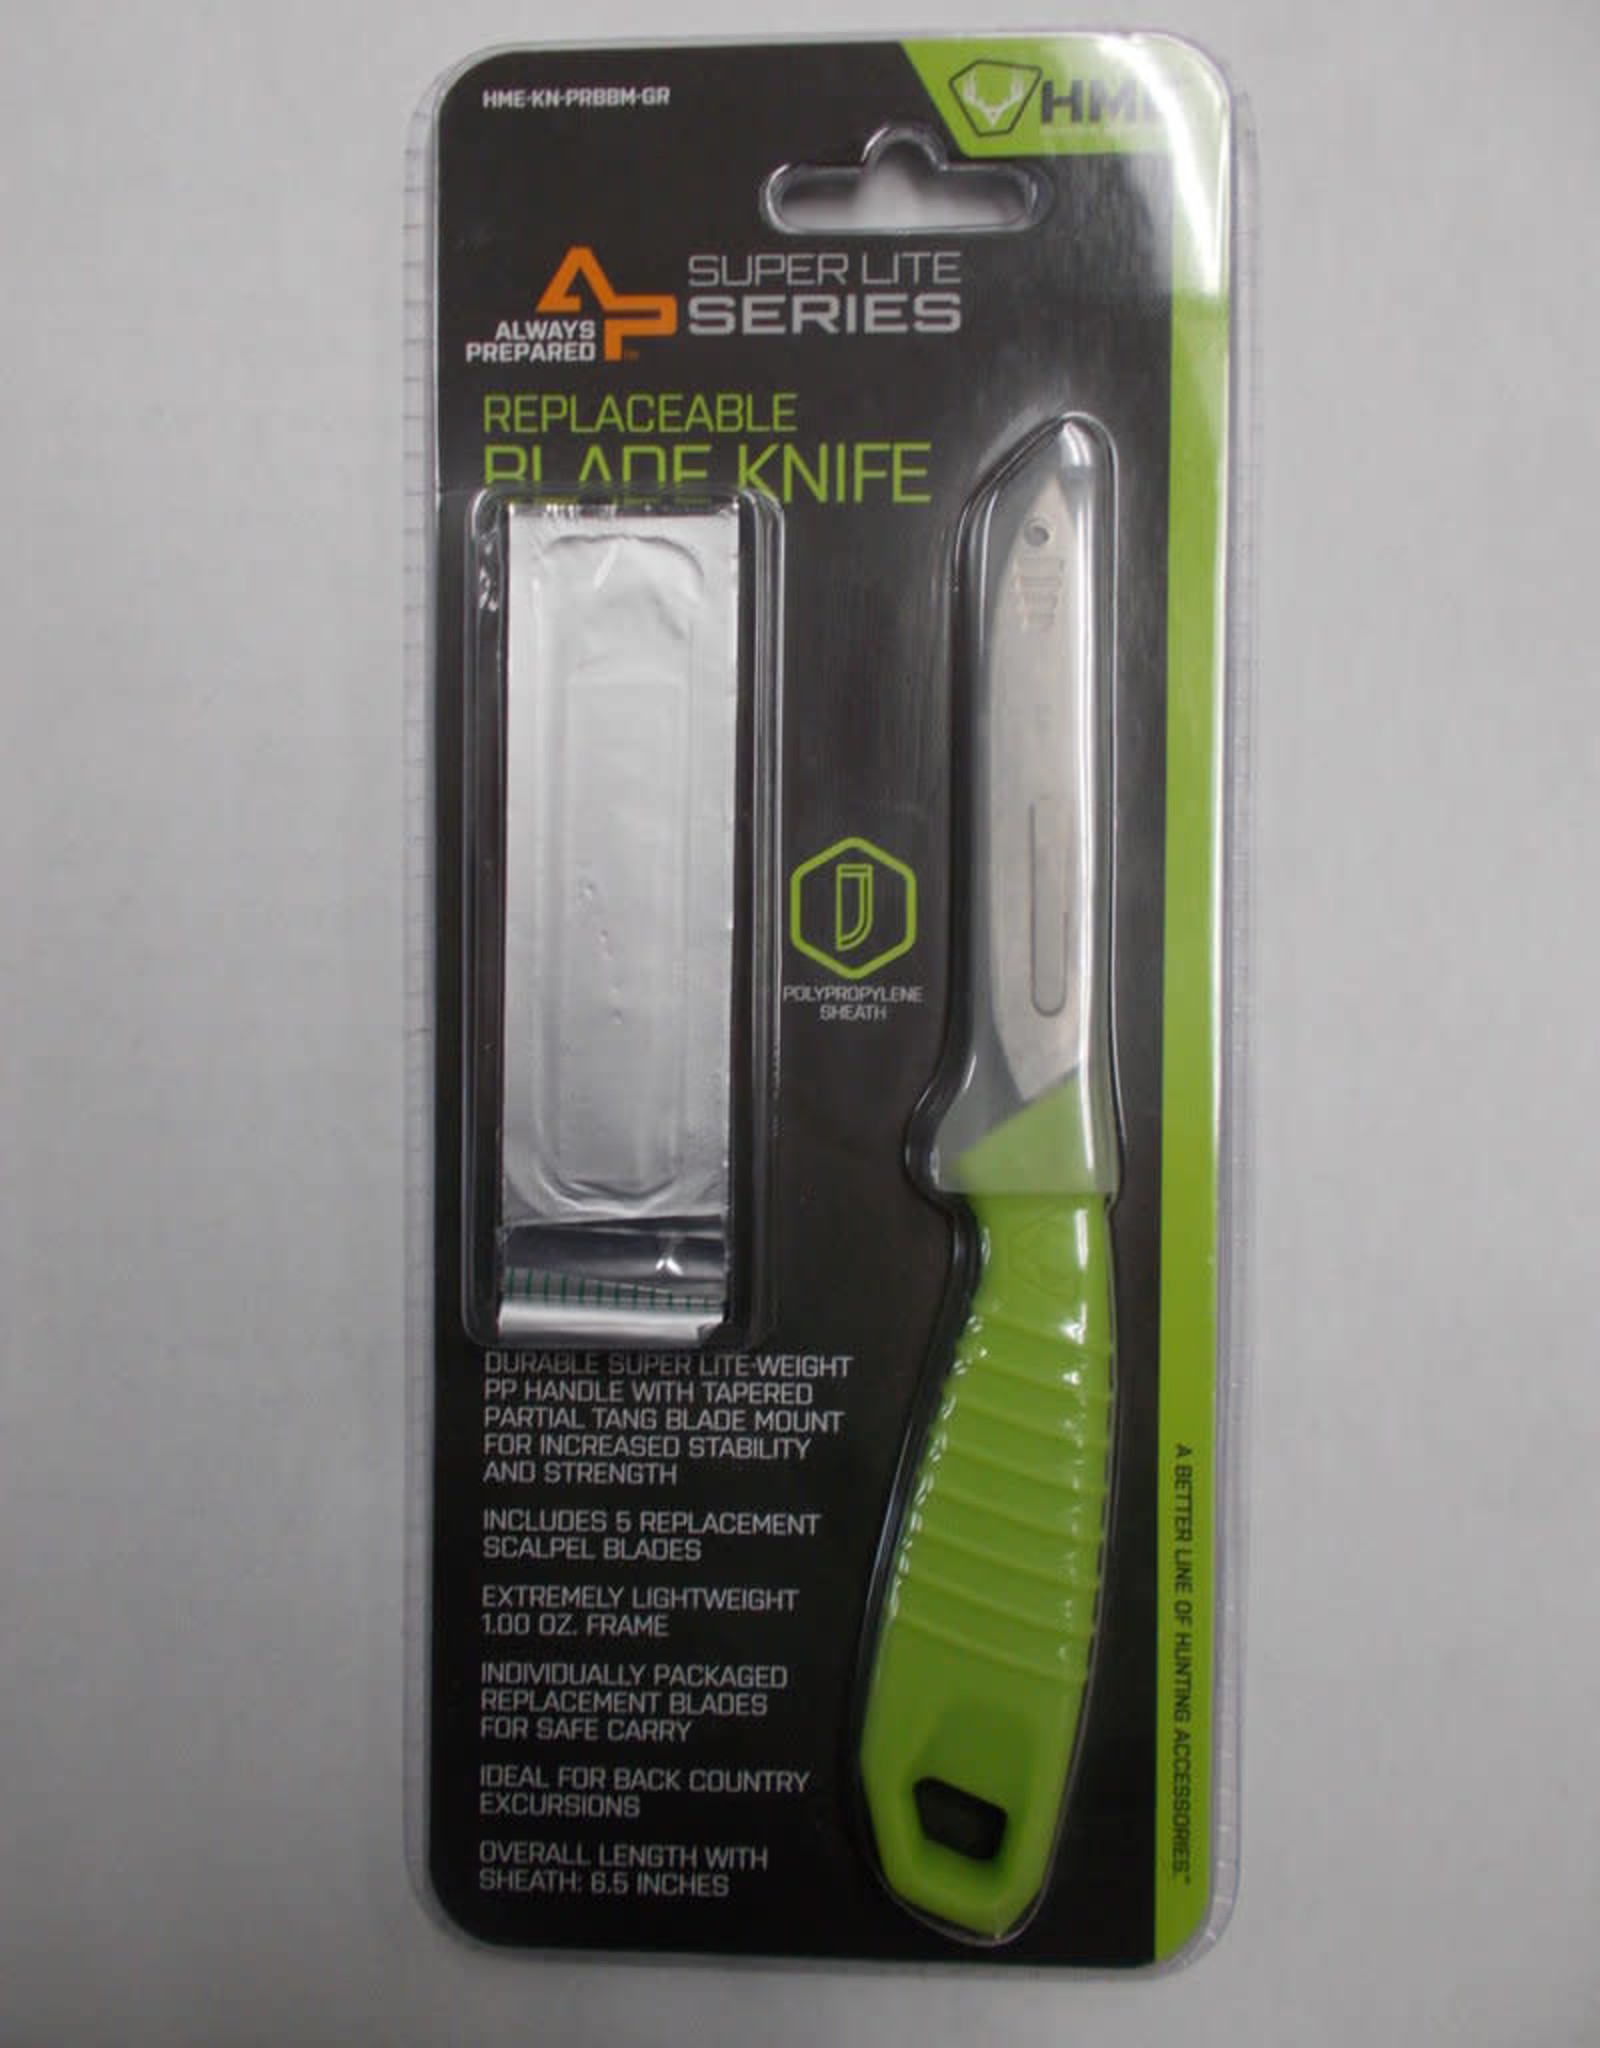 HME Replaceable Blade Knife